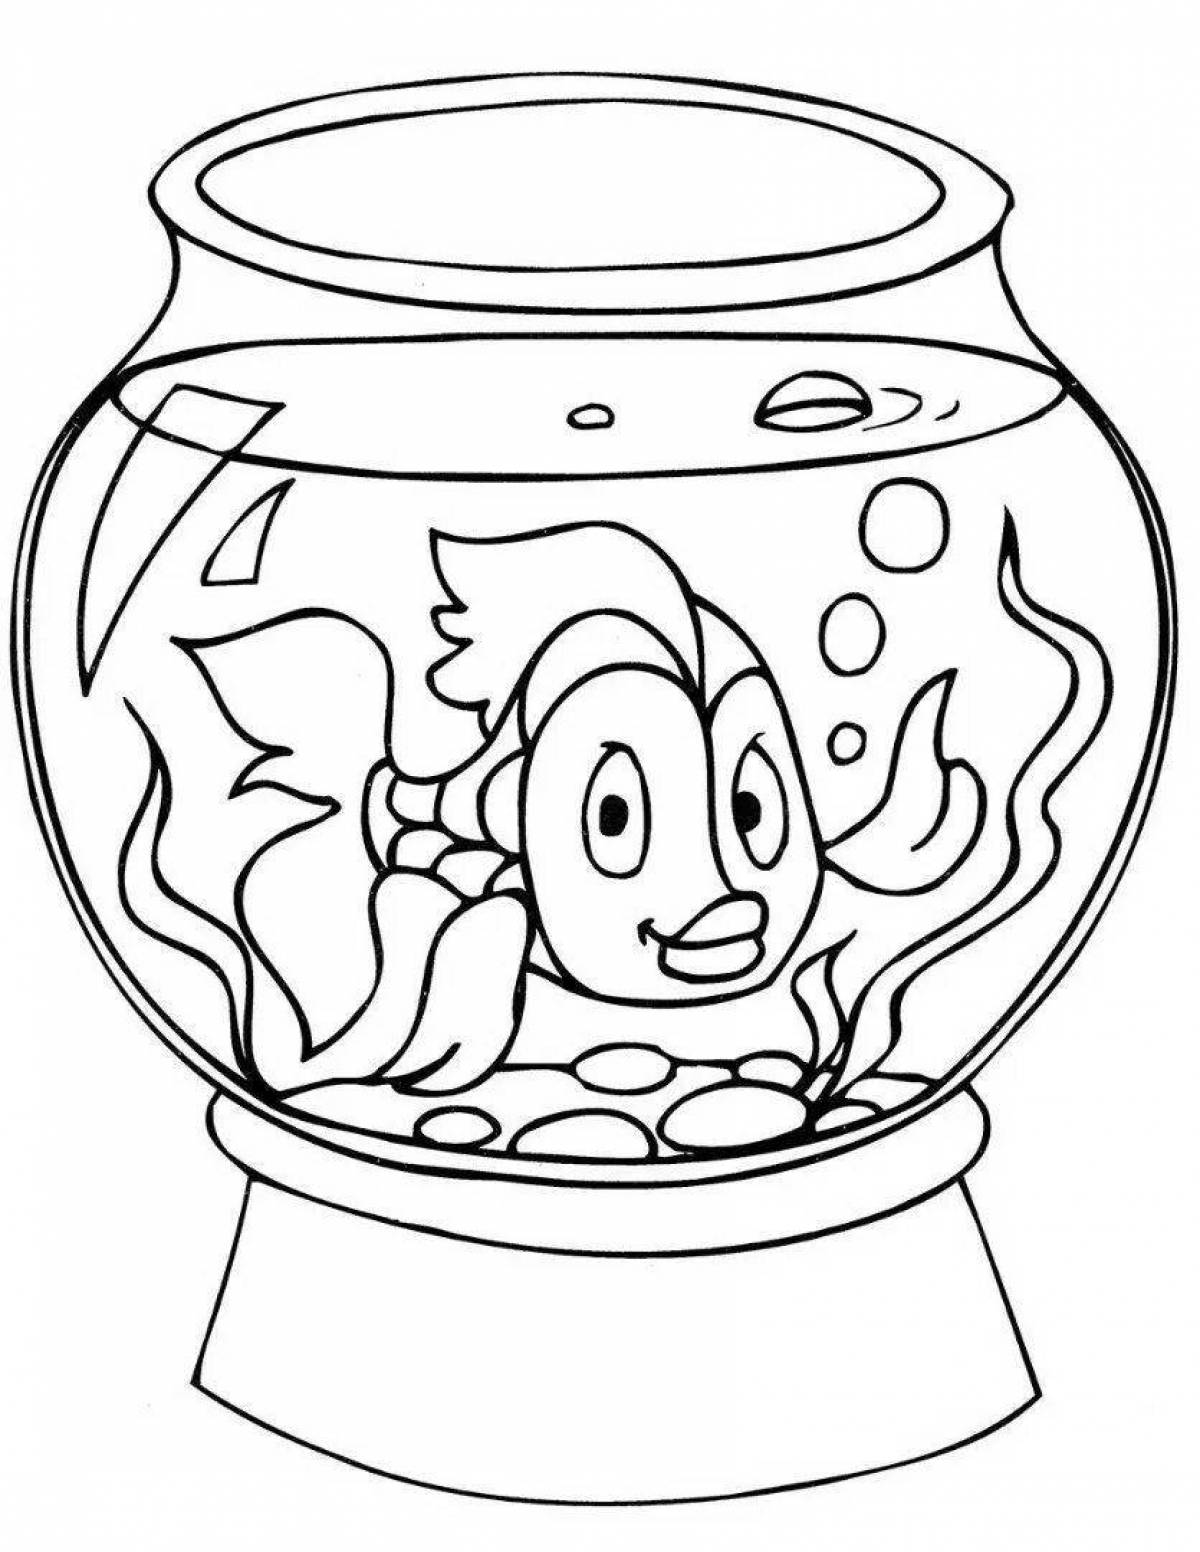 Attractive aquarium fish coloring book for 5-6 year olds